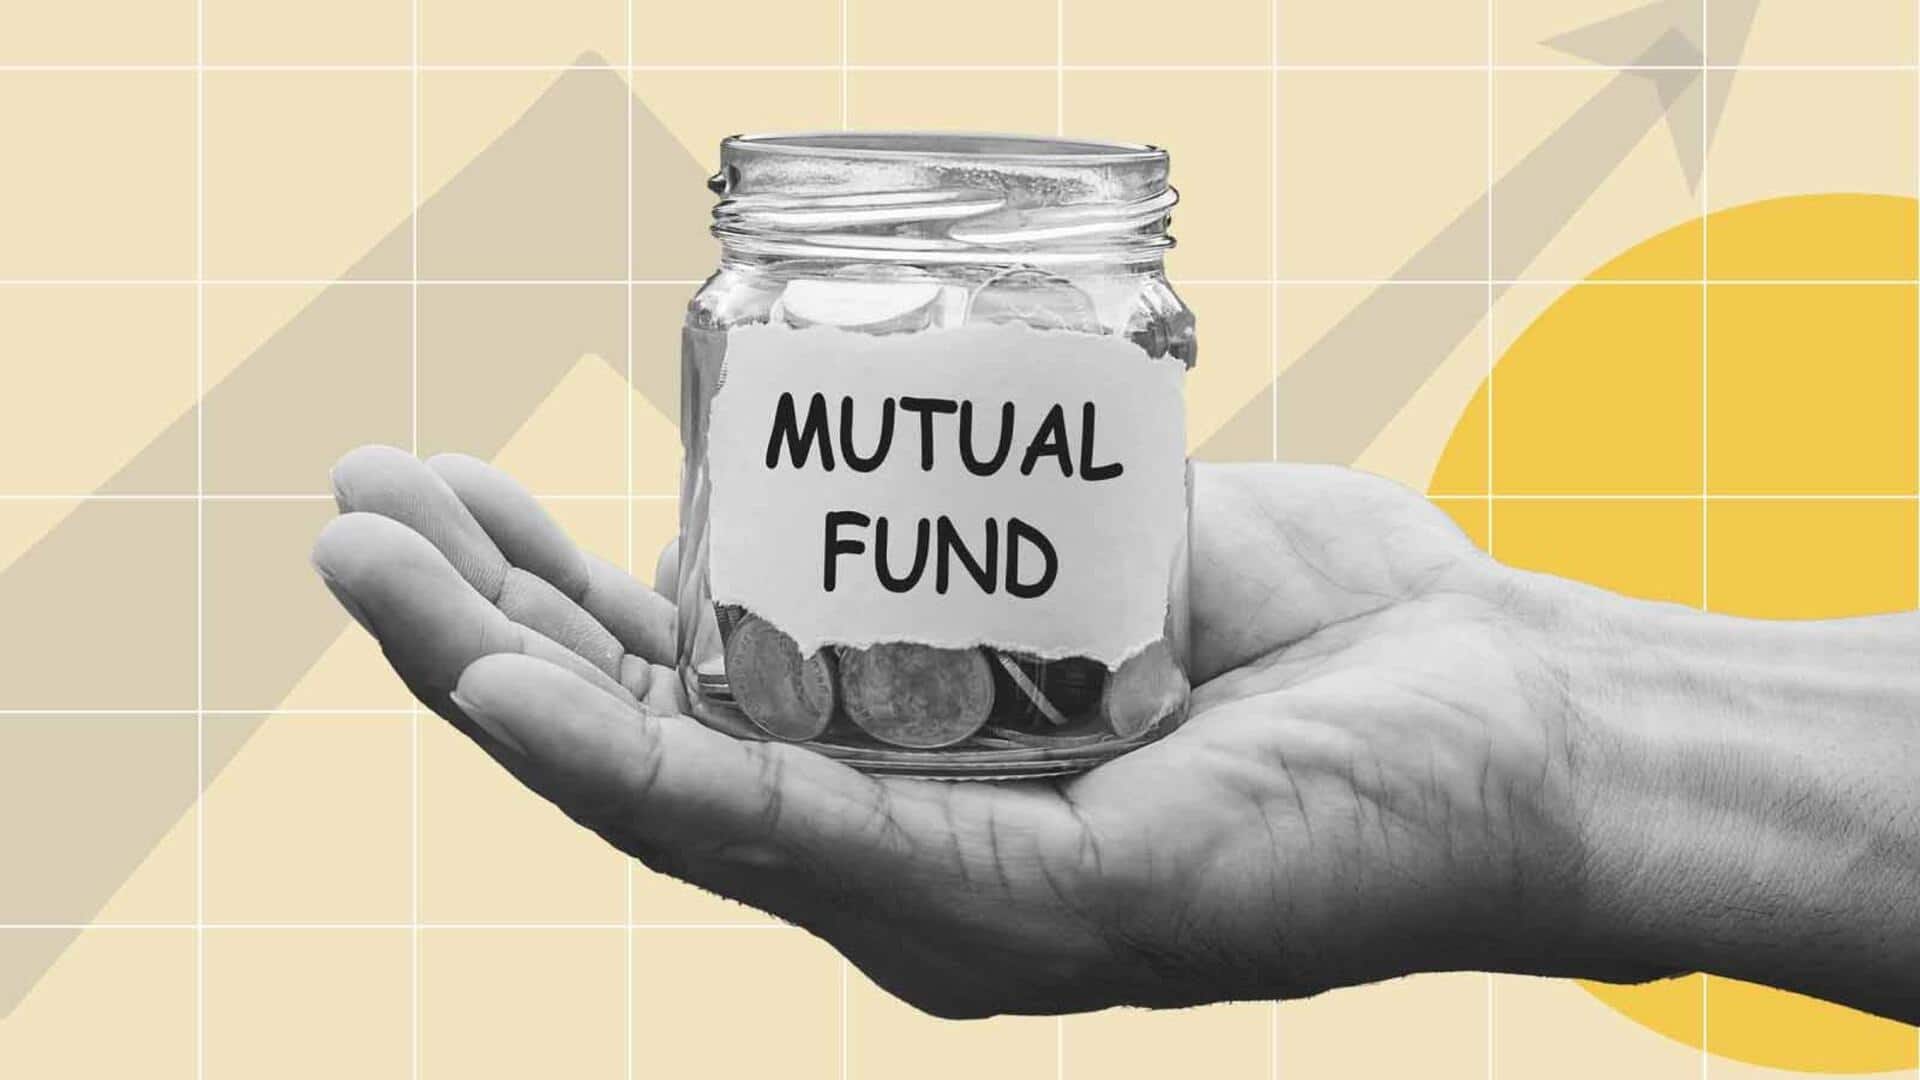 Mutual funds demand easing RBI's limit on overseas investments